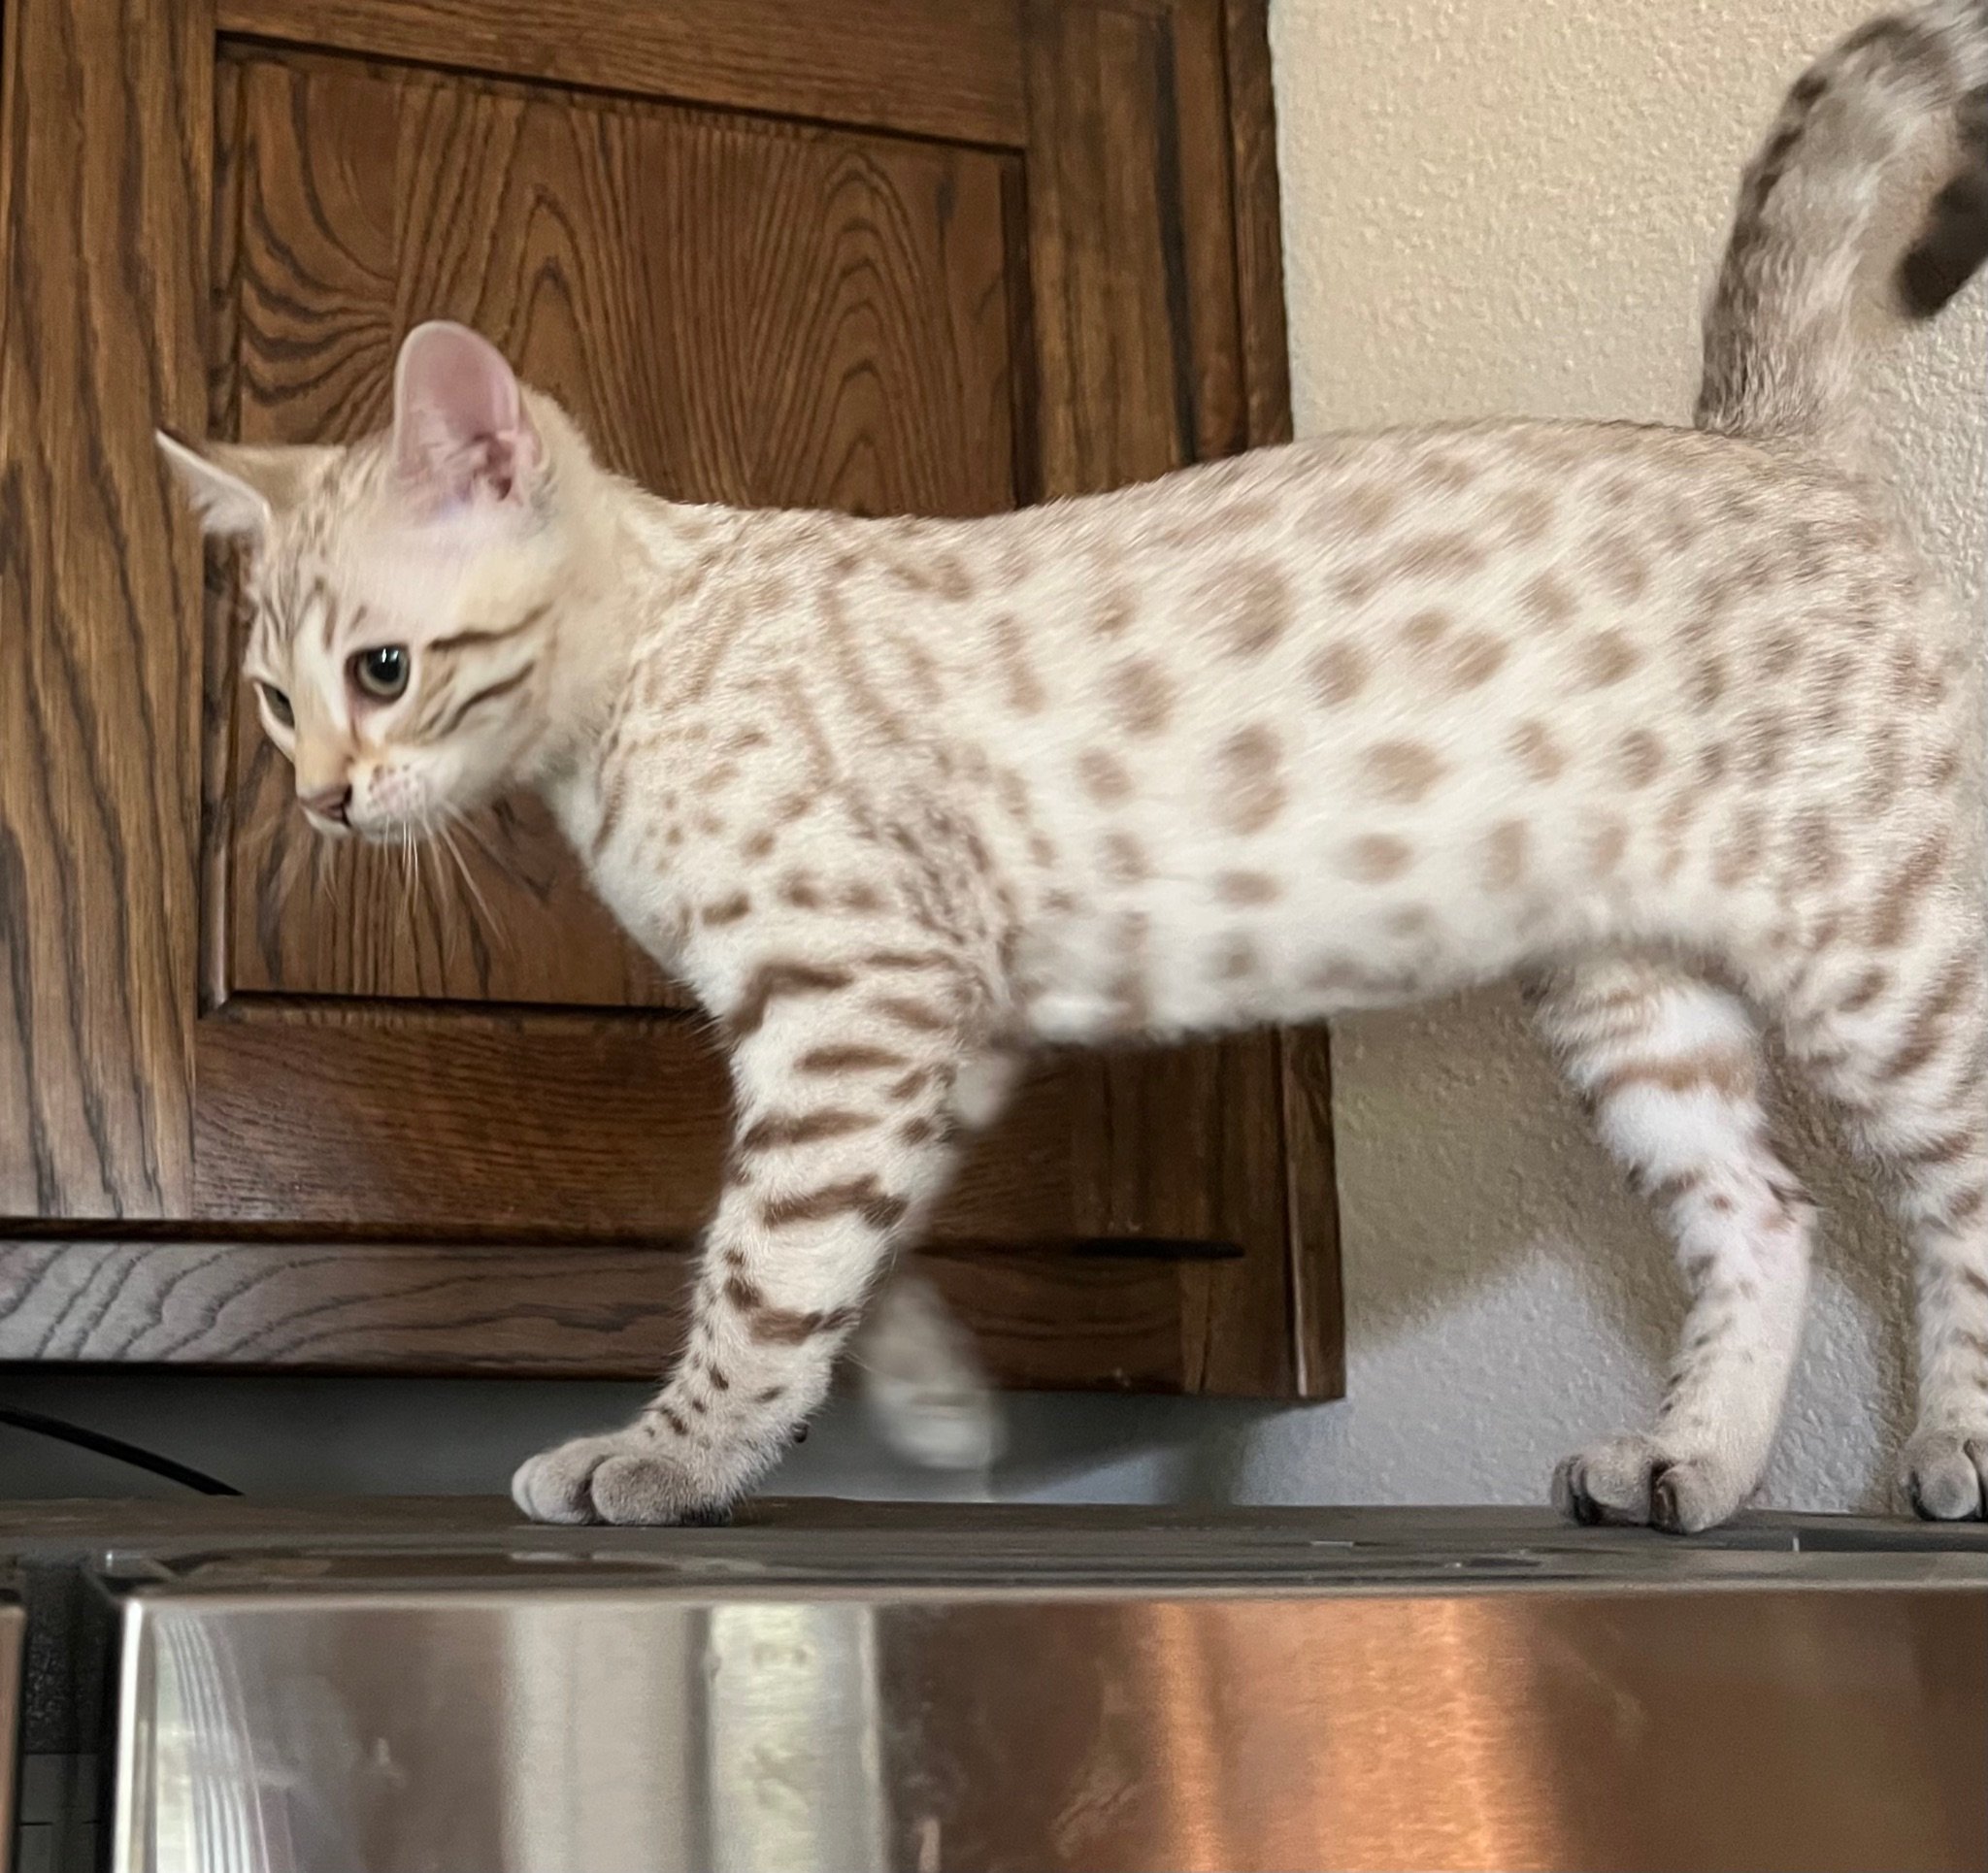 A Bengal kitten from Lone Star Bengal Cats showcasing their feline passion by confidently standing atop a refrigerator.